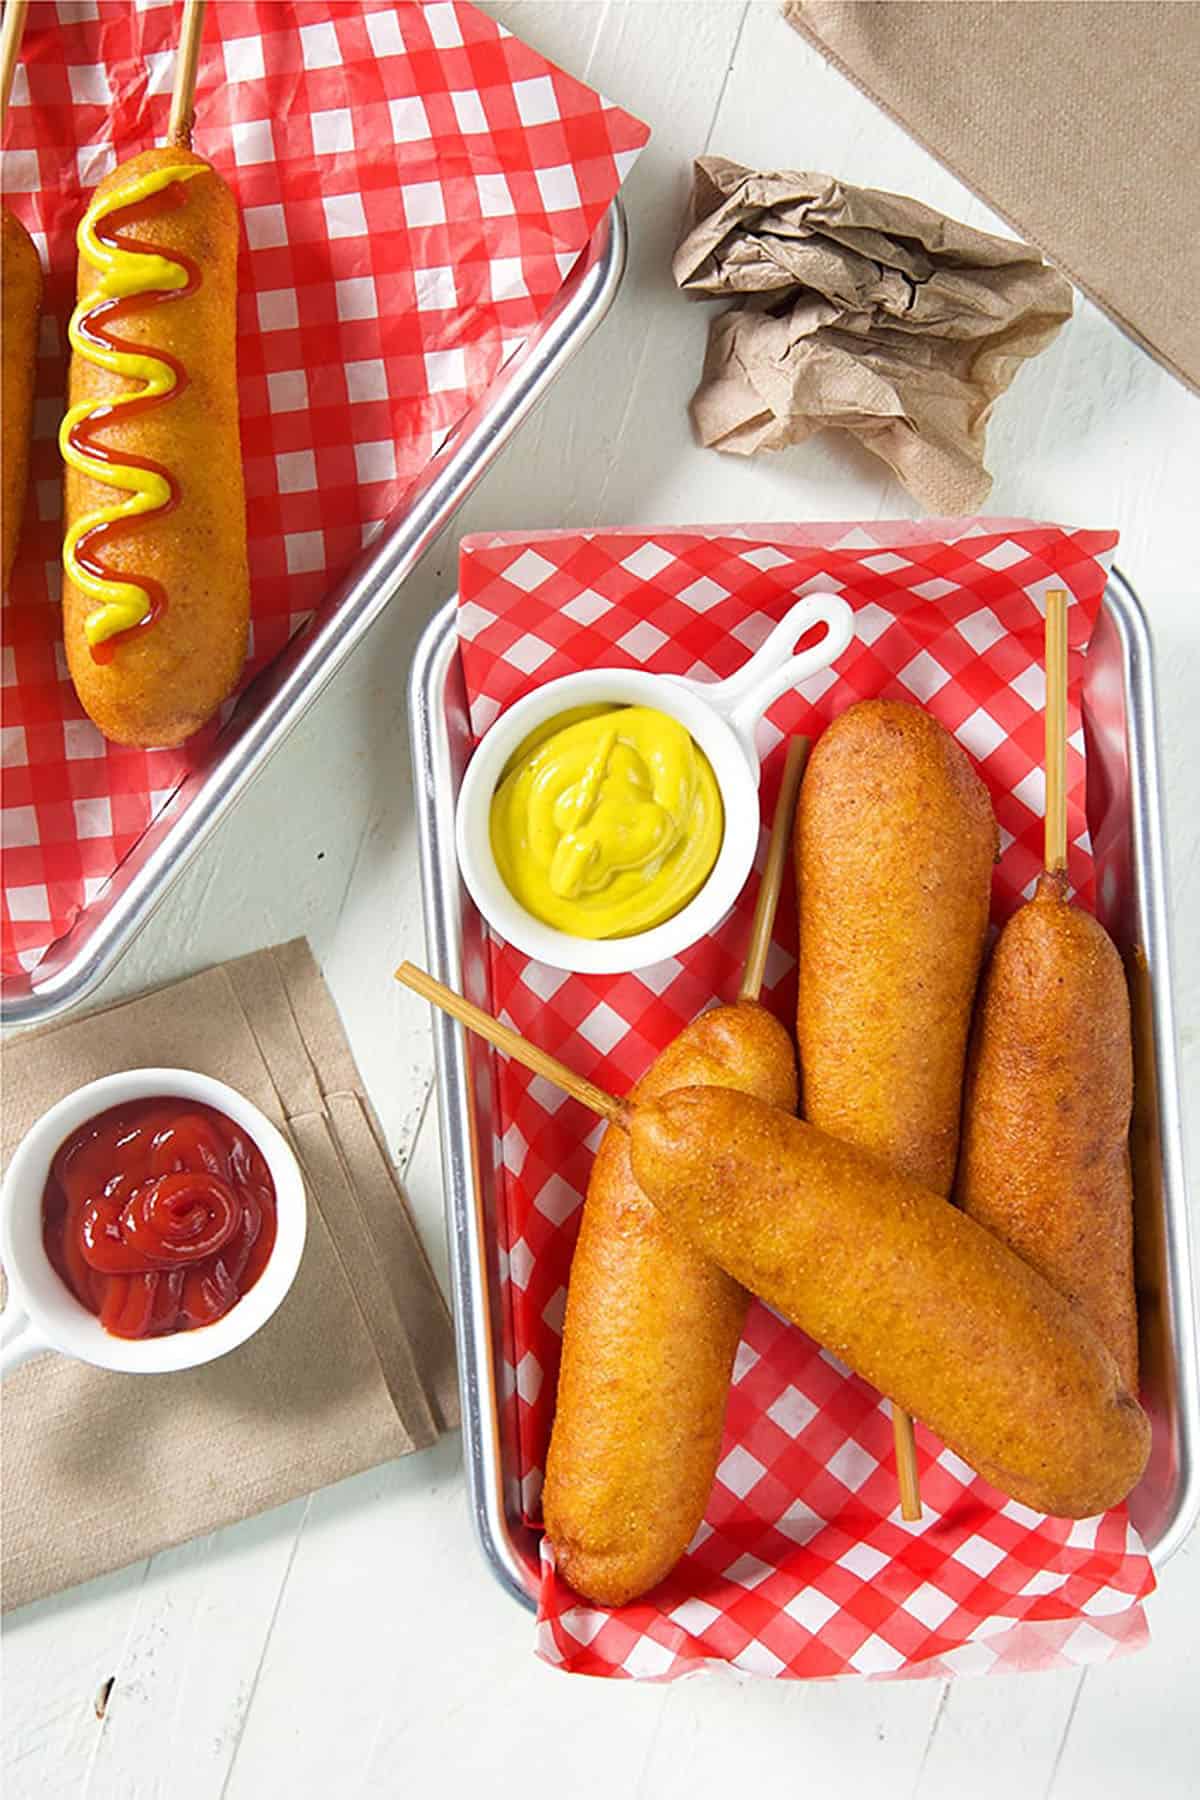 overhead shot of corn dogs on red and white paper with a dish of mustard.